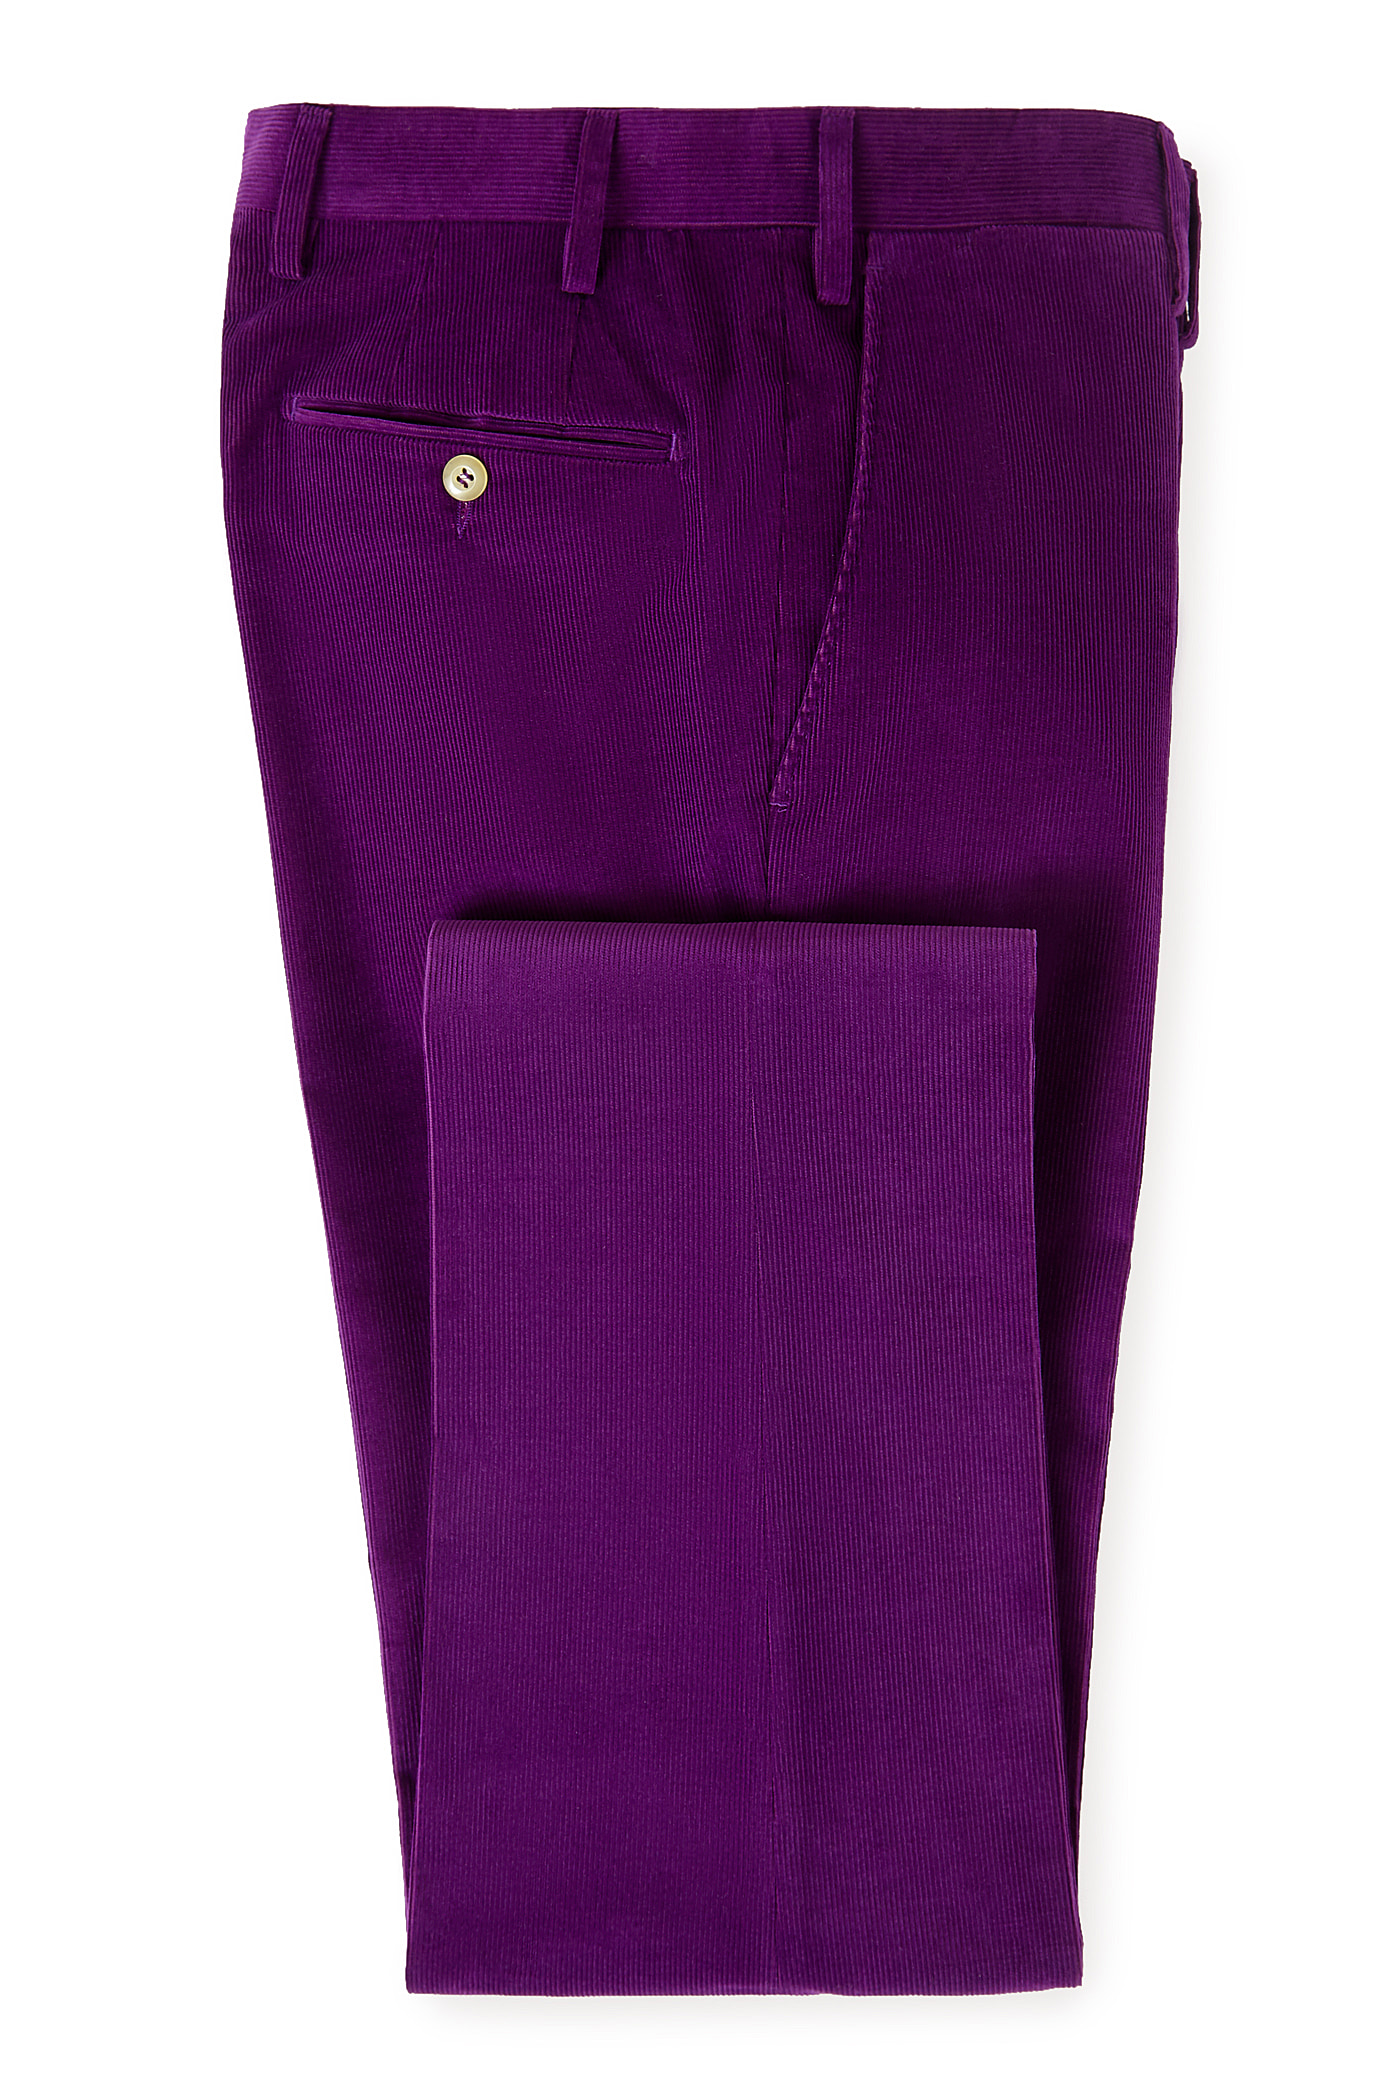 LOW WAISTED CORDUROY TROUSERS  Purple  NOISY MAY